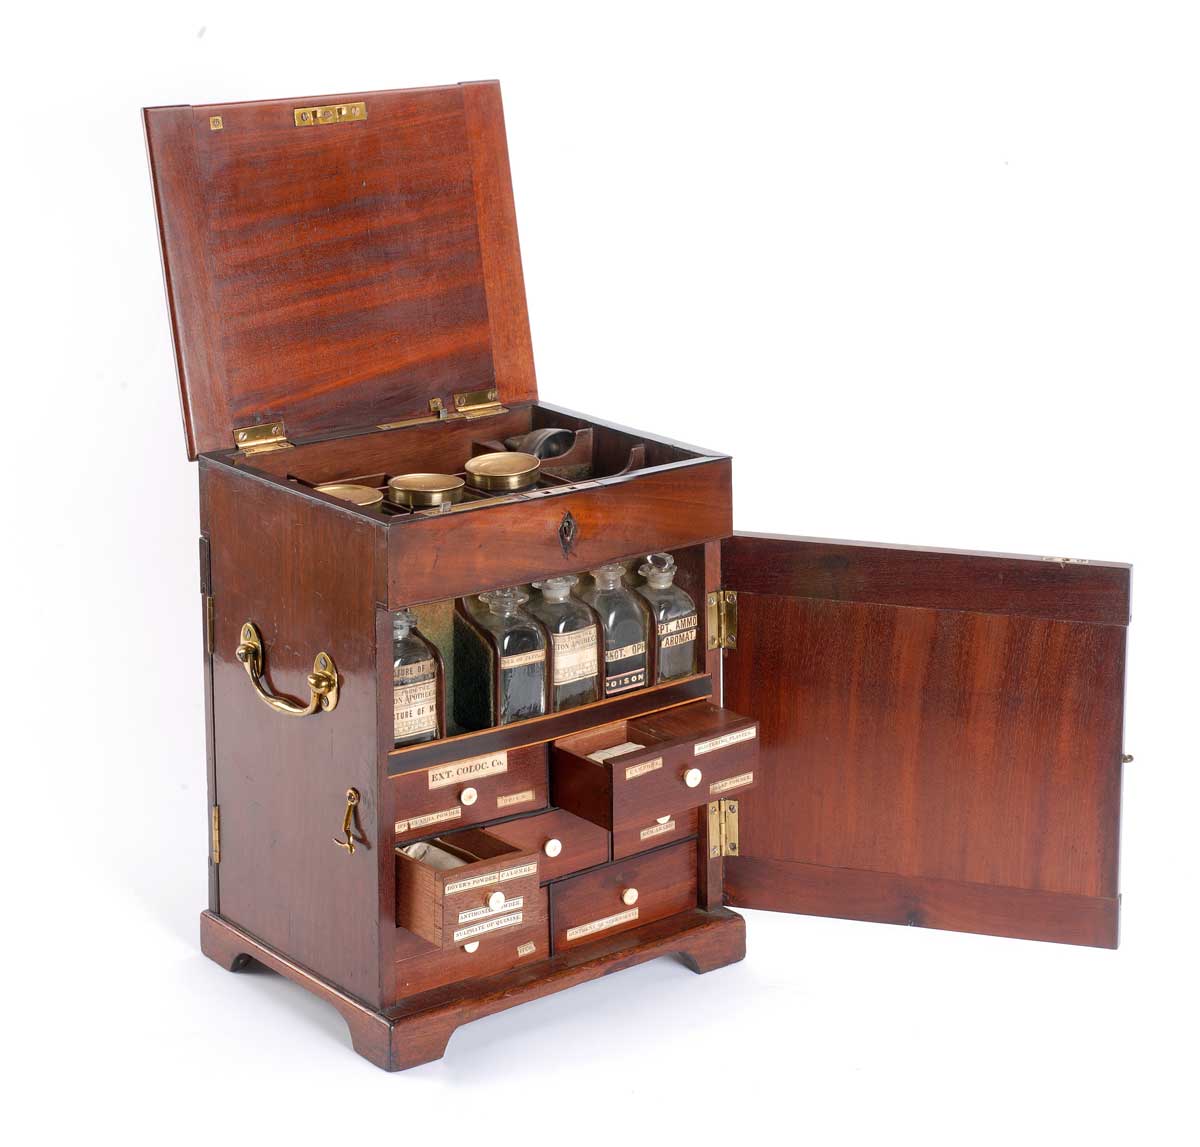 Medicine chest with eight drawers containing ointment jars, packets of medicine and bottles including essence of peppermint, opium, gum arabic and camphor. 